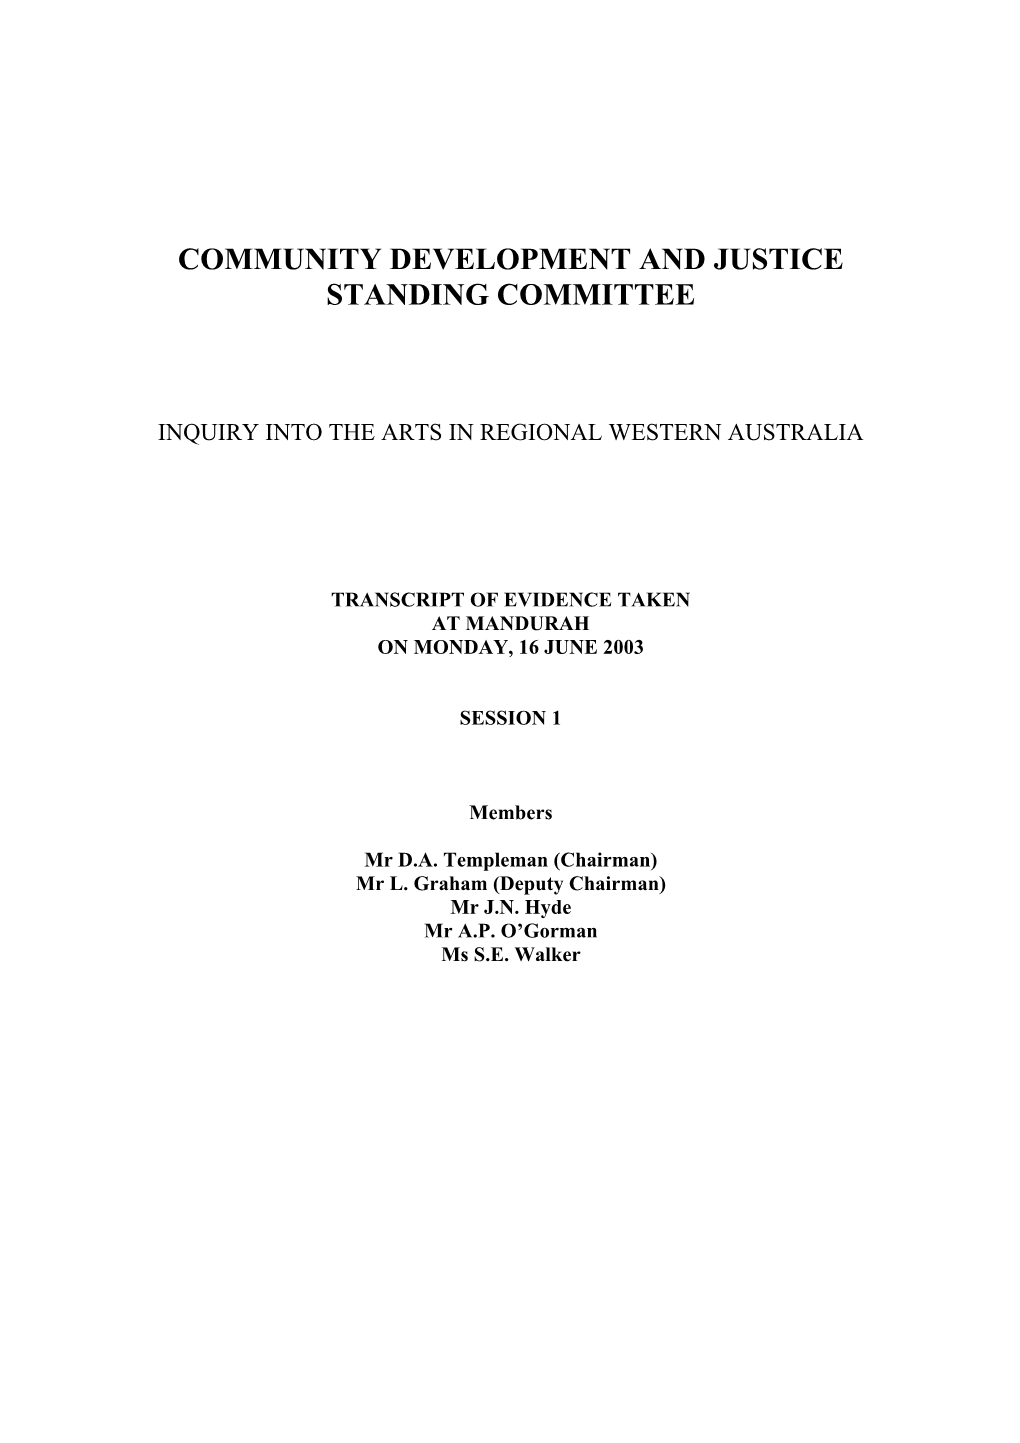 Community Development and Justice Standing Committee